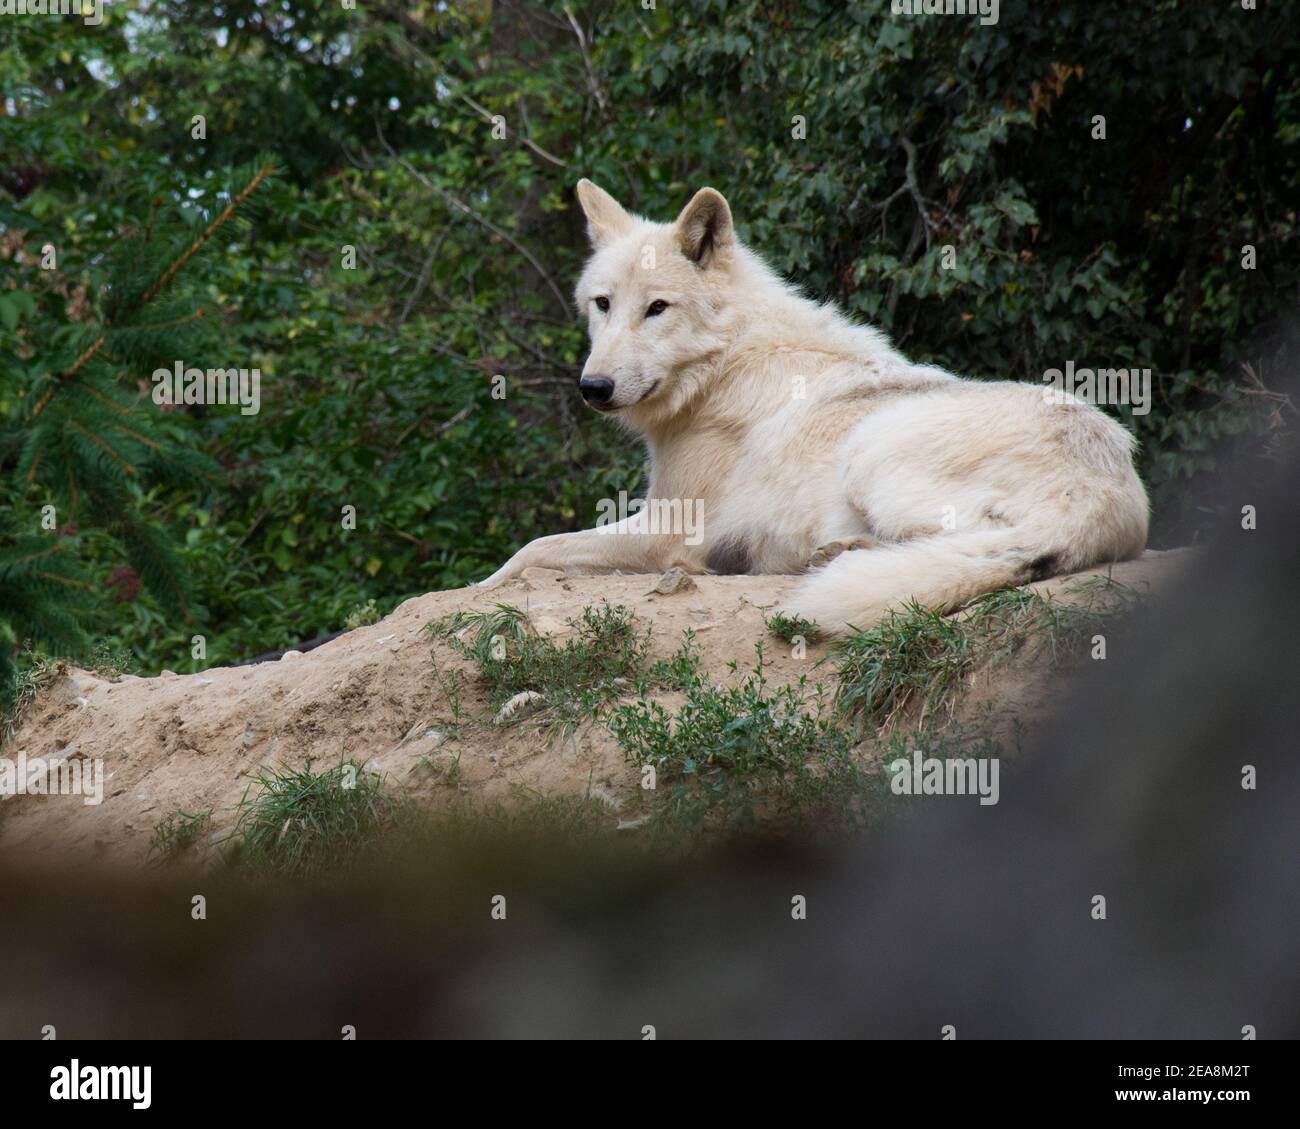 BRNO, CZECH REPUBLIC - Feb 17, 2018: Wolf sitting on a hill in a zoo. Stock Photo